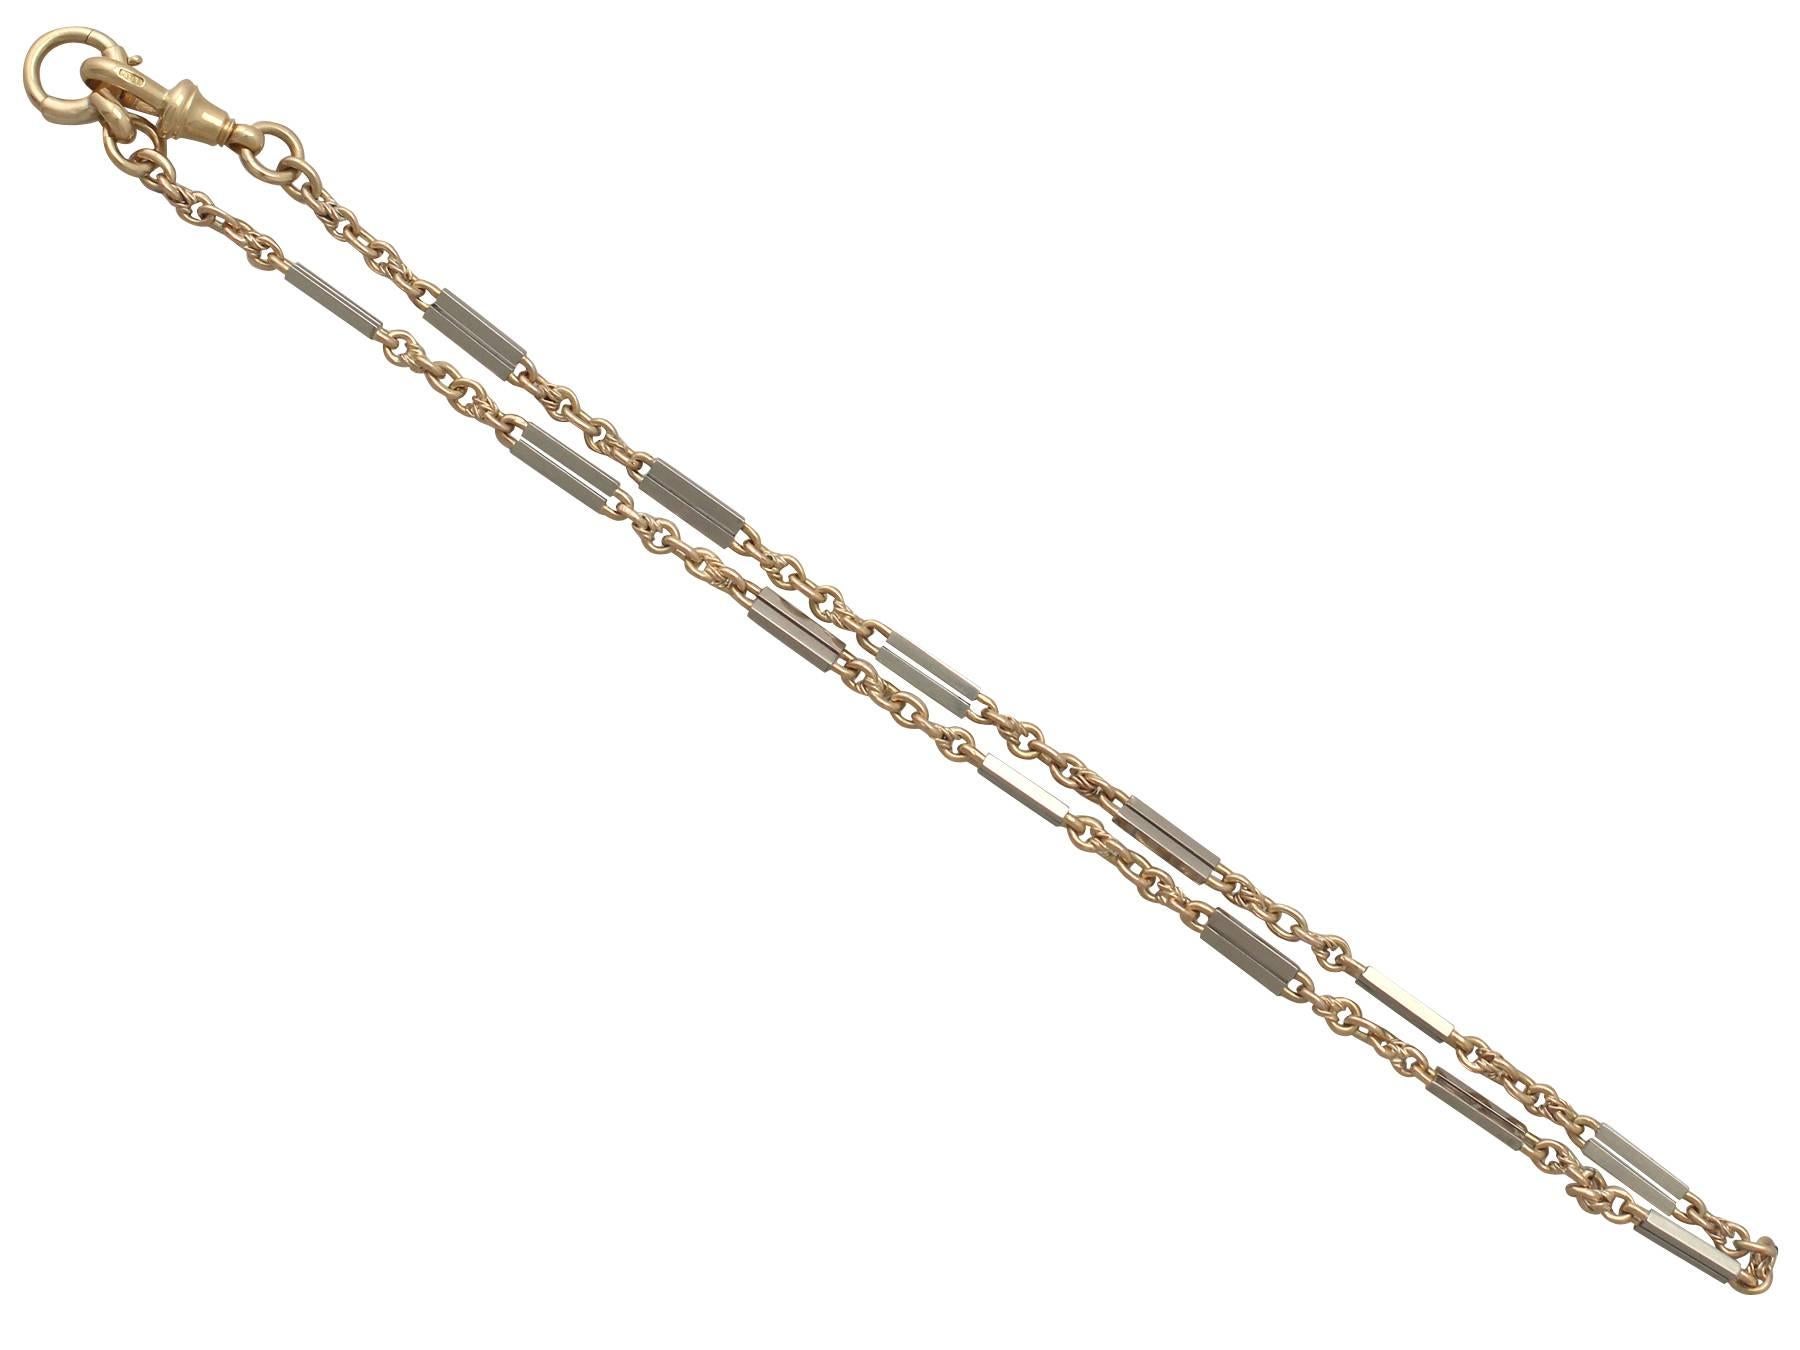 A fine and impressive antique 18 karat yellow gold and platinum fancy style watch chain / bracelet; part of our diverse antique jewelry and estate jewelry collections 

This fine and impressive antique 1920's watch chain has been crafted in 18k